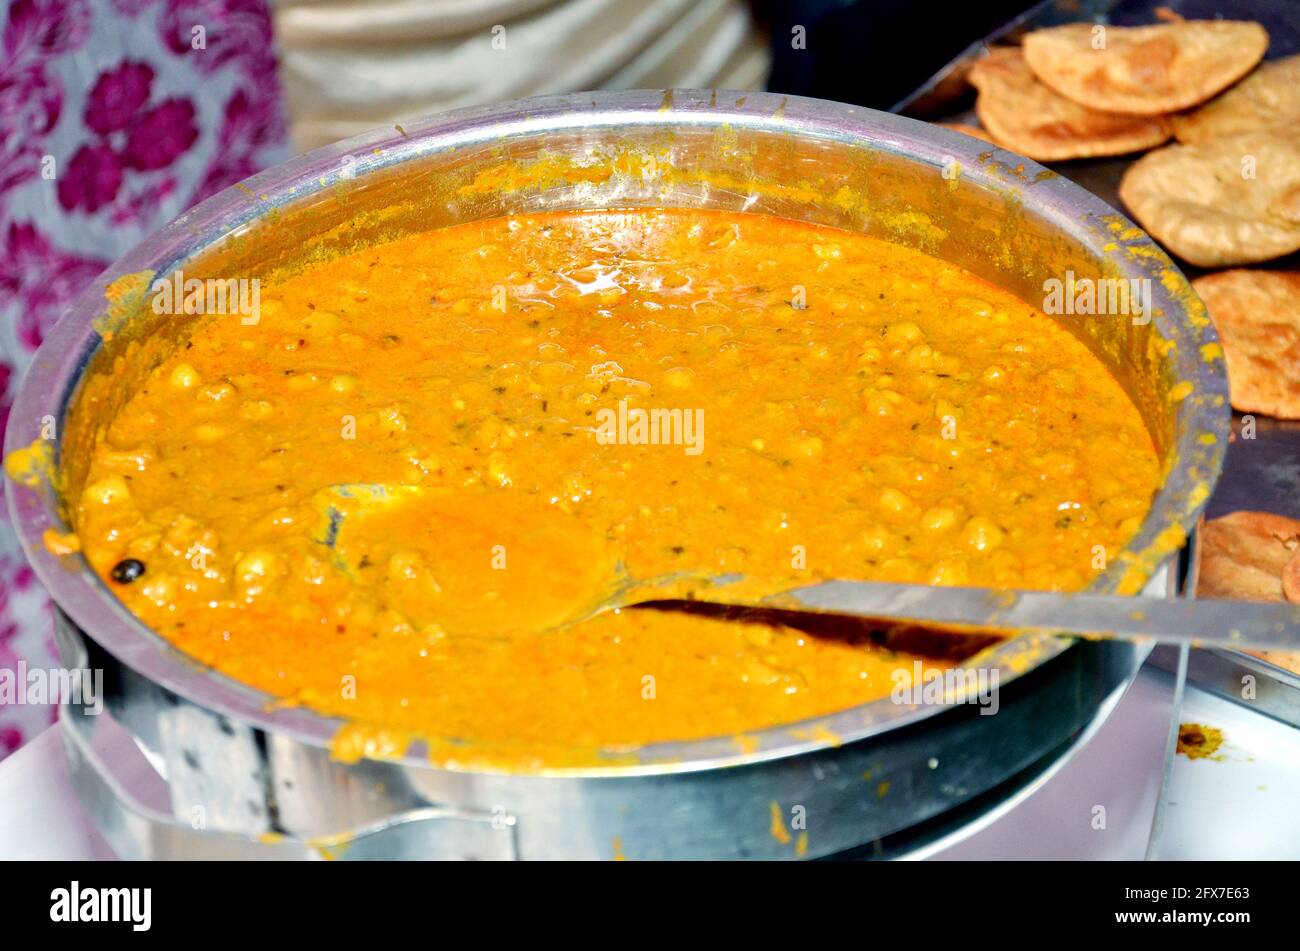 A traditional Indian wedding buffet. Assortment of traditional cuisine at an Asian wedding. Stock Photo